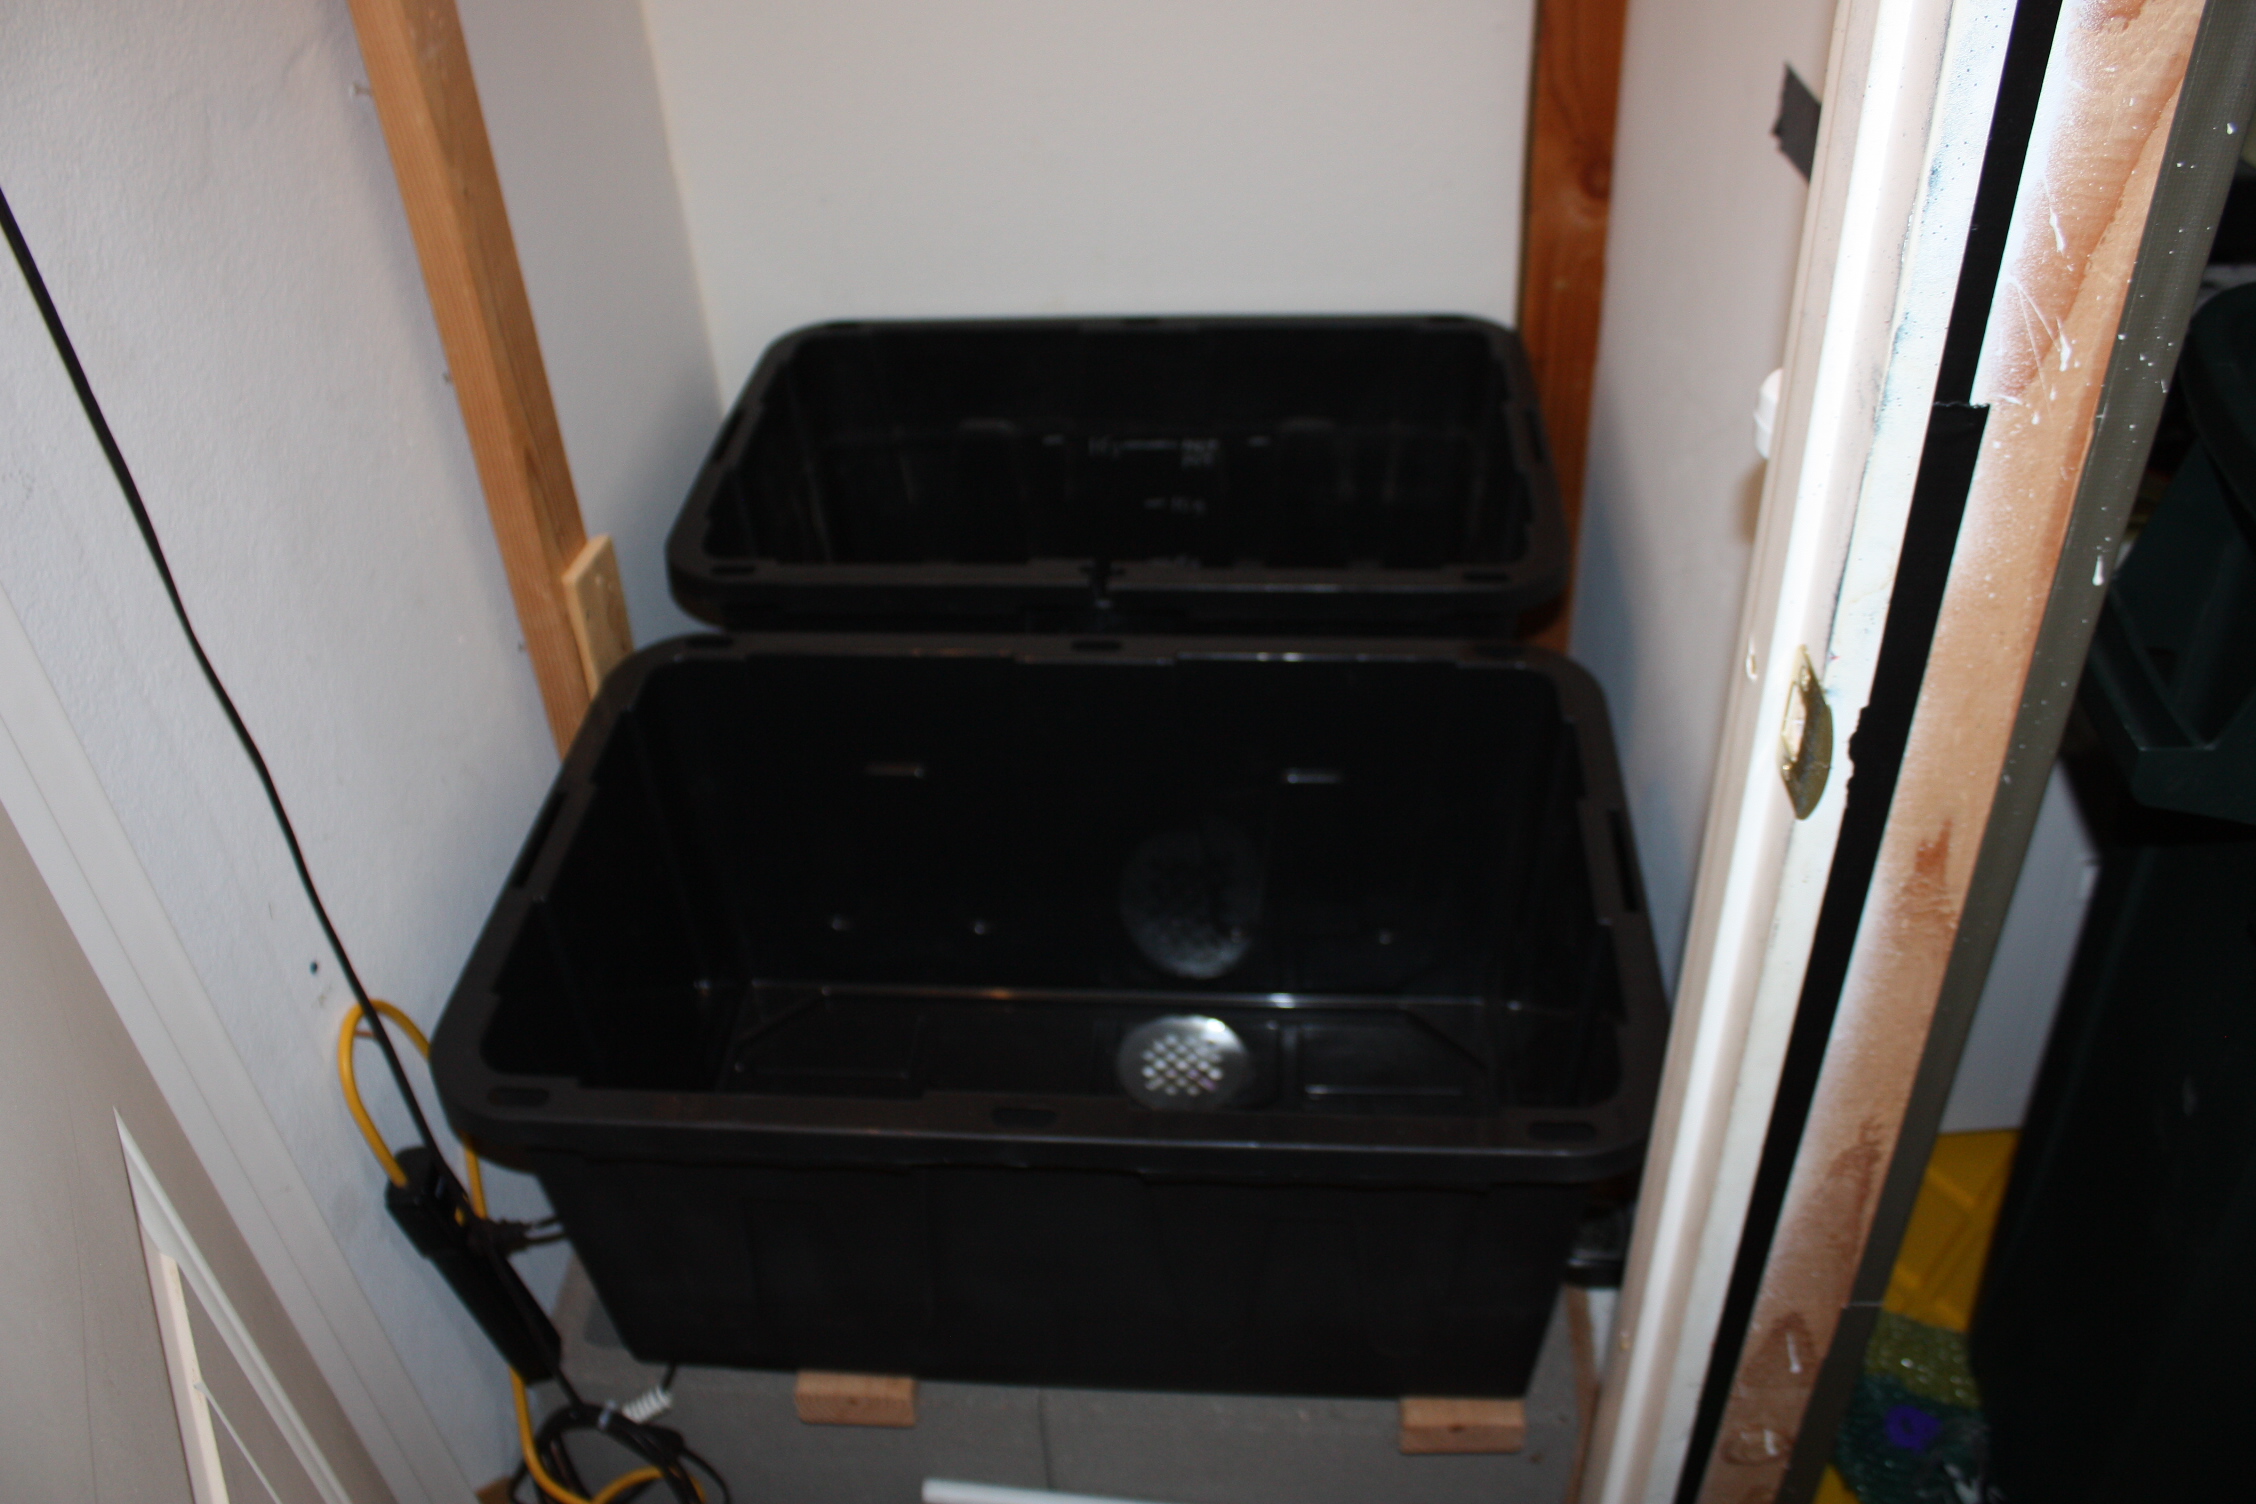 phase 1: 2 tubs plumbed